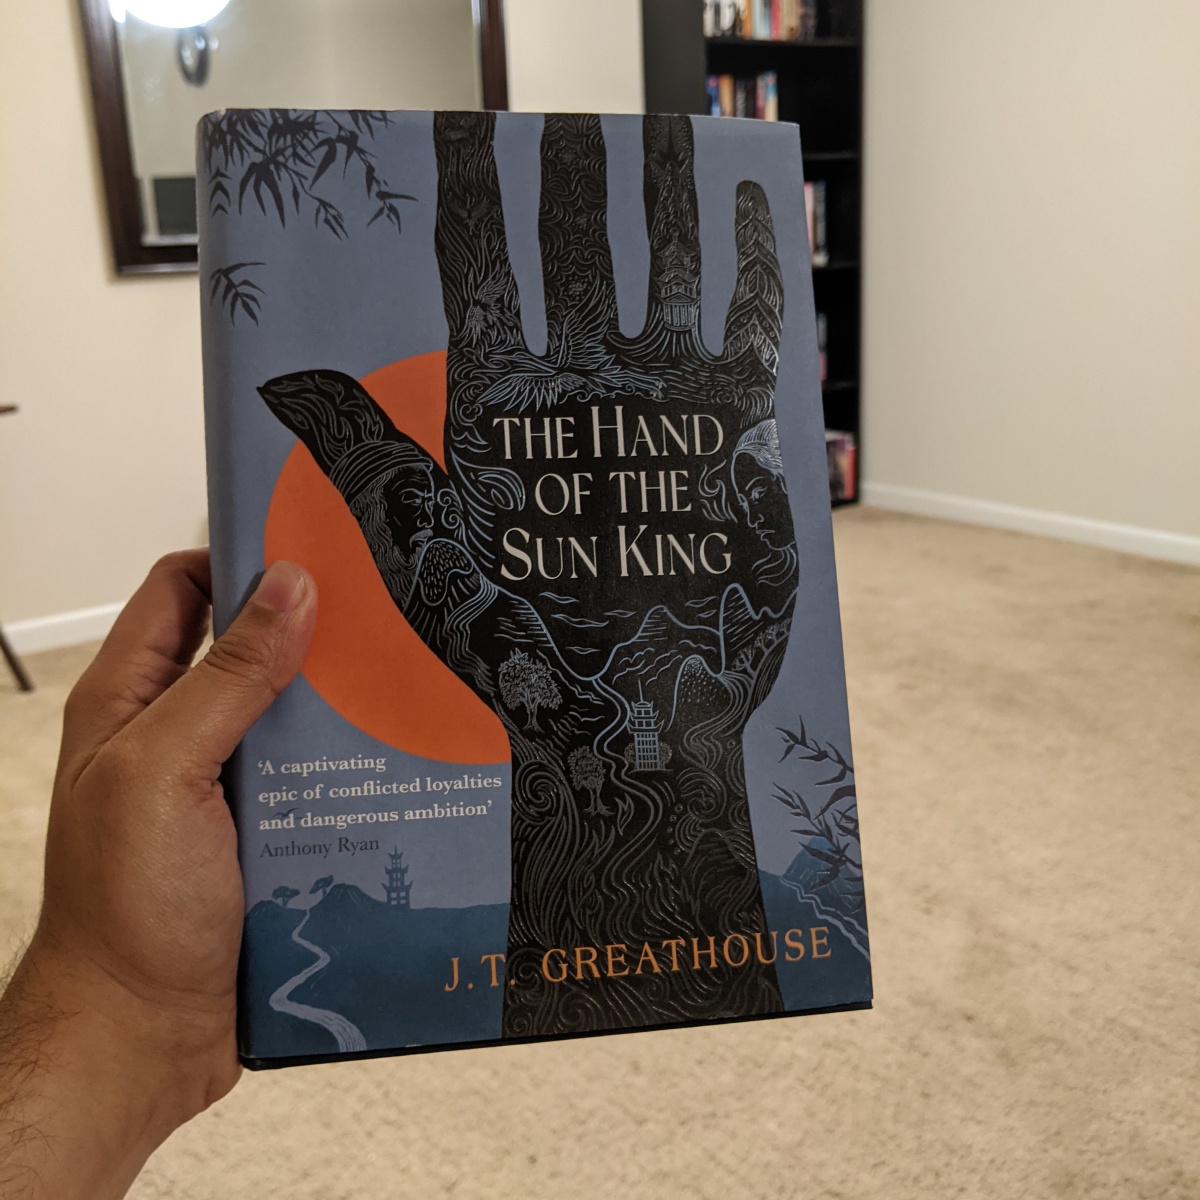 The Hand of the Sun King by J.T. Greathouse